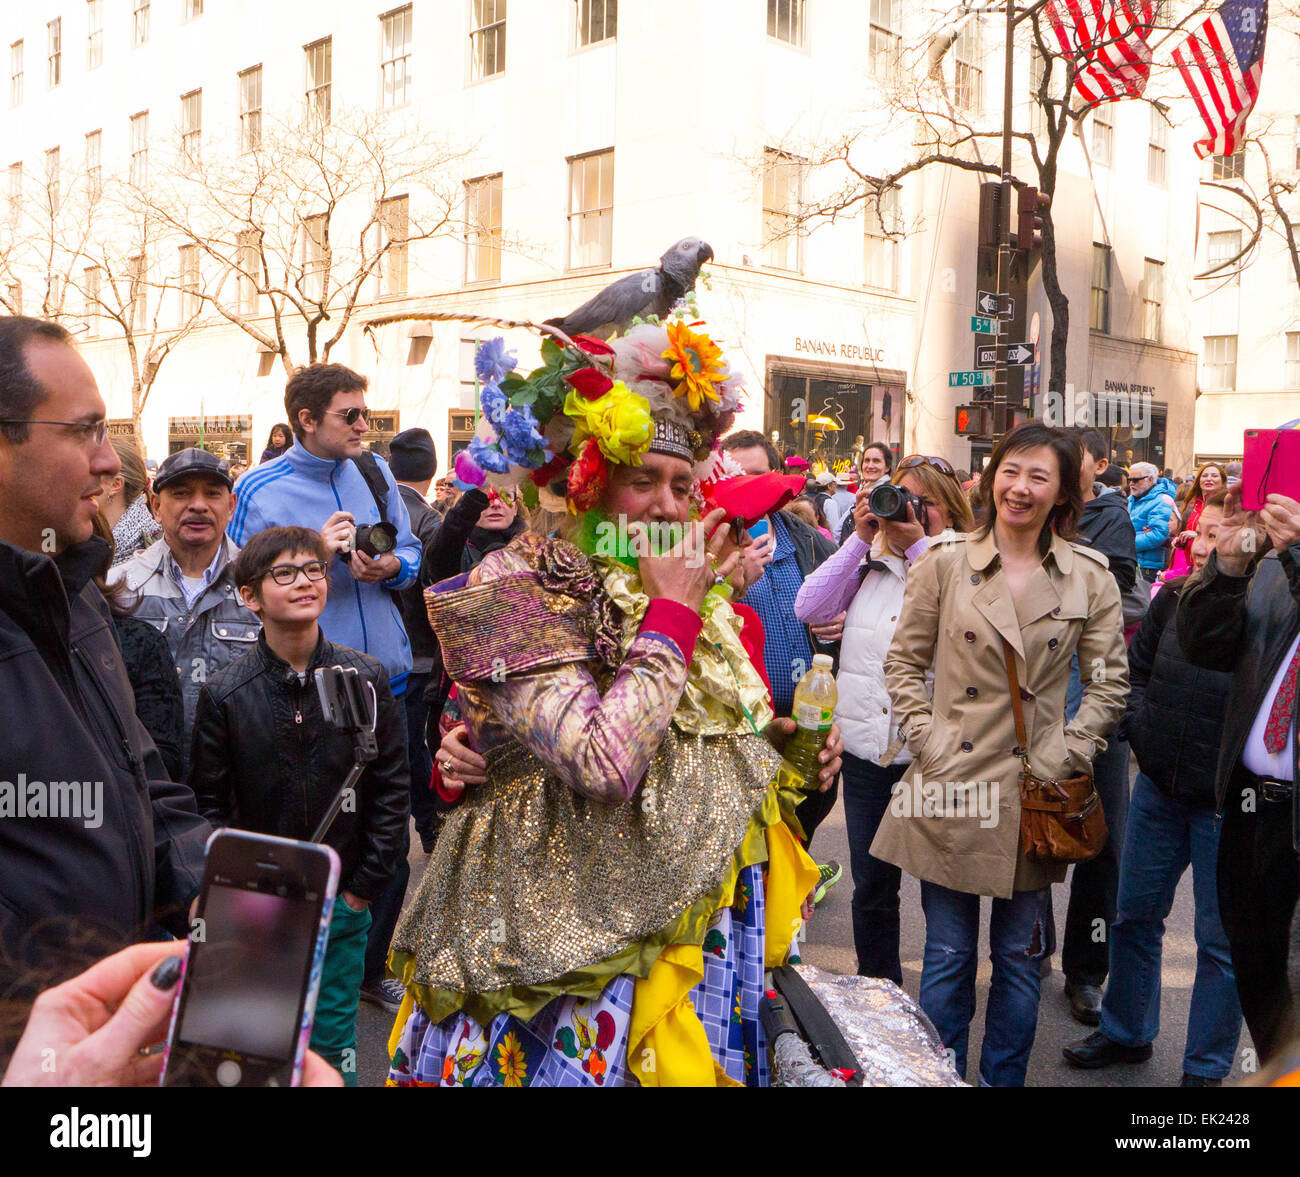 New York, USA. 5th April, 2015. A man dressed up with a Gray Parrot on his head  during The 2015 Easter Parade and Easter Bonnet Festival in New York City Credit:  Donald bowers/Alamy Live News Stock Photo